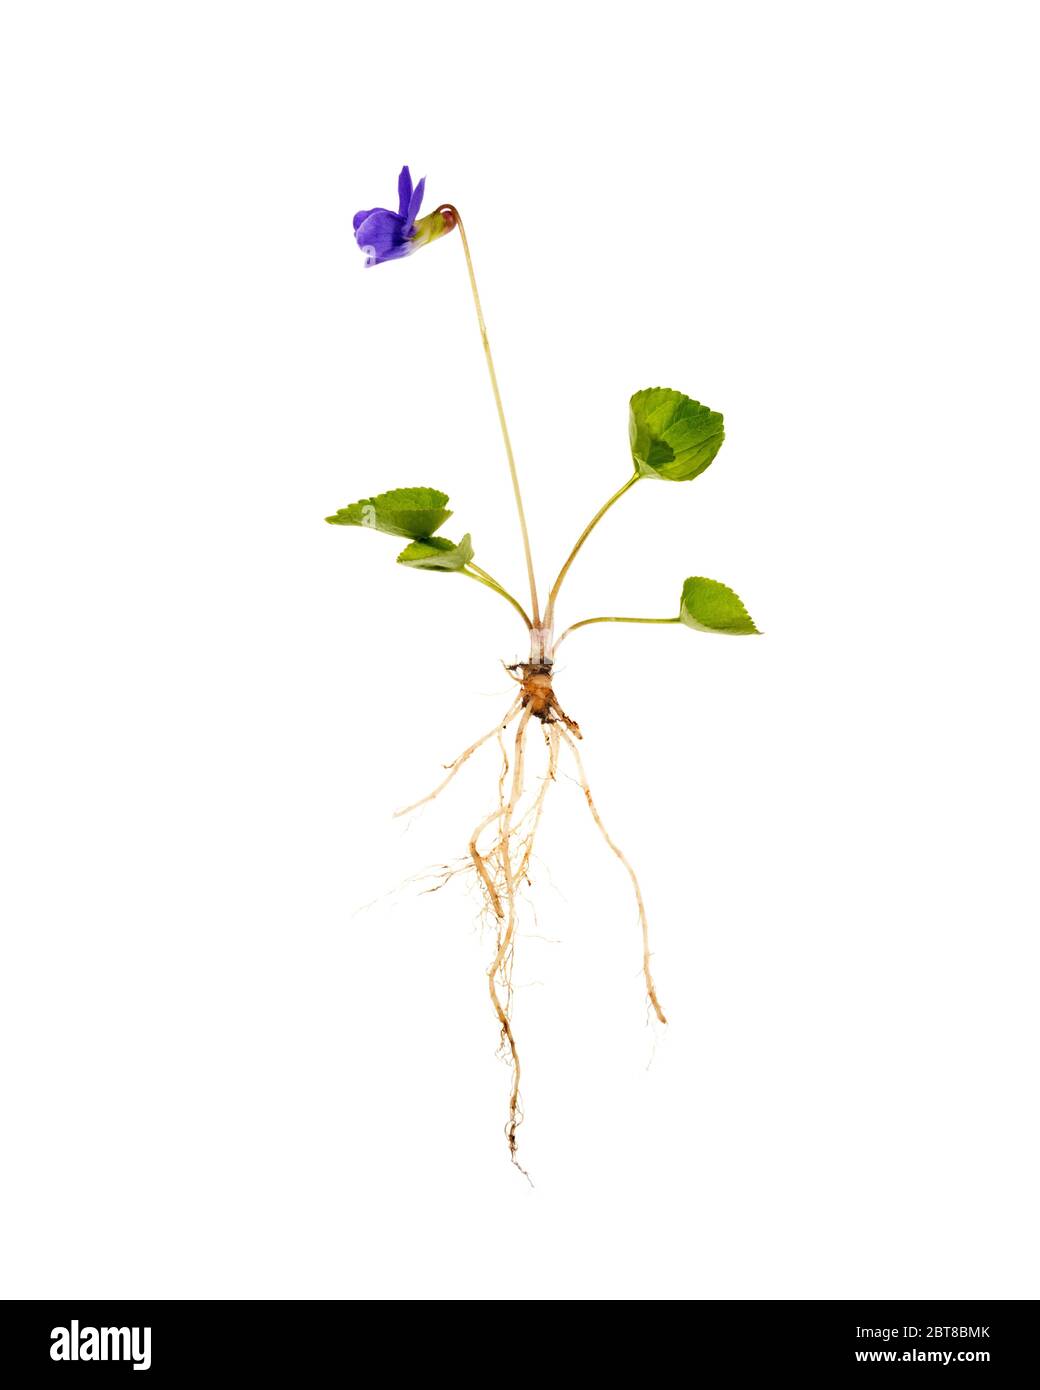 Botanical photo of the Common Blue Violet showing the entire plant - roots, leaves, and flowers. Stock Photo